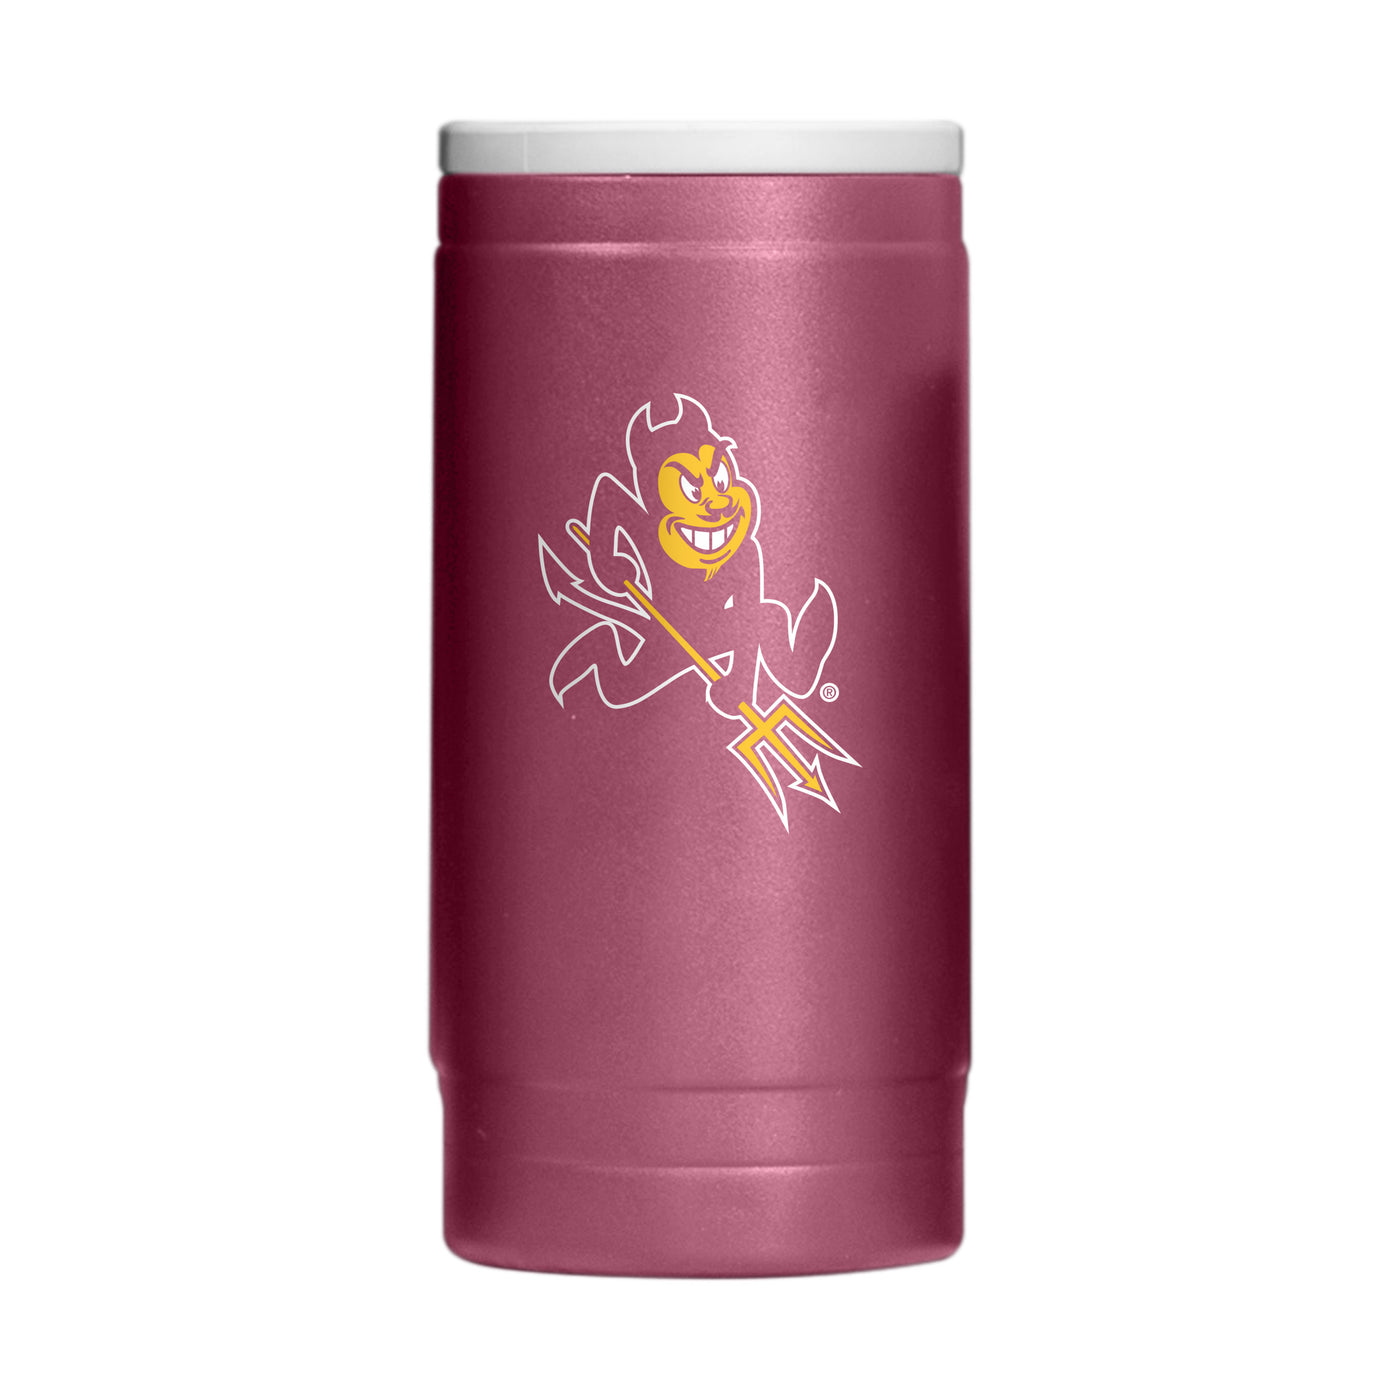 ASU maroon plastic coolie for taller slim cans with the ASU mascot sparky on it.